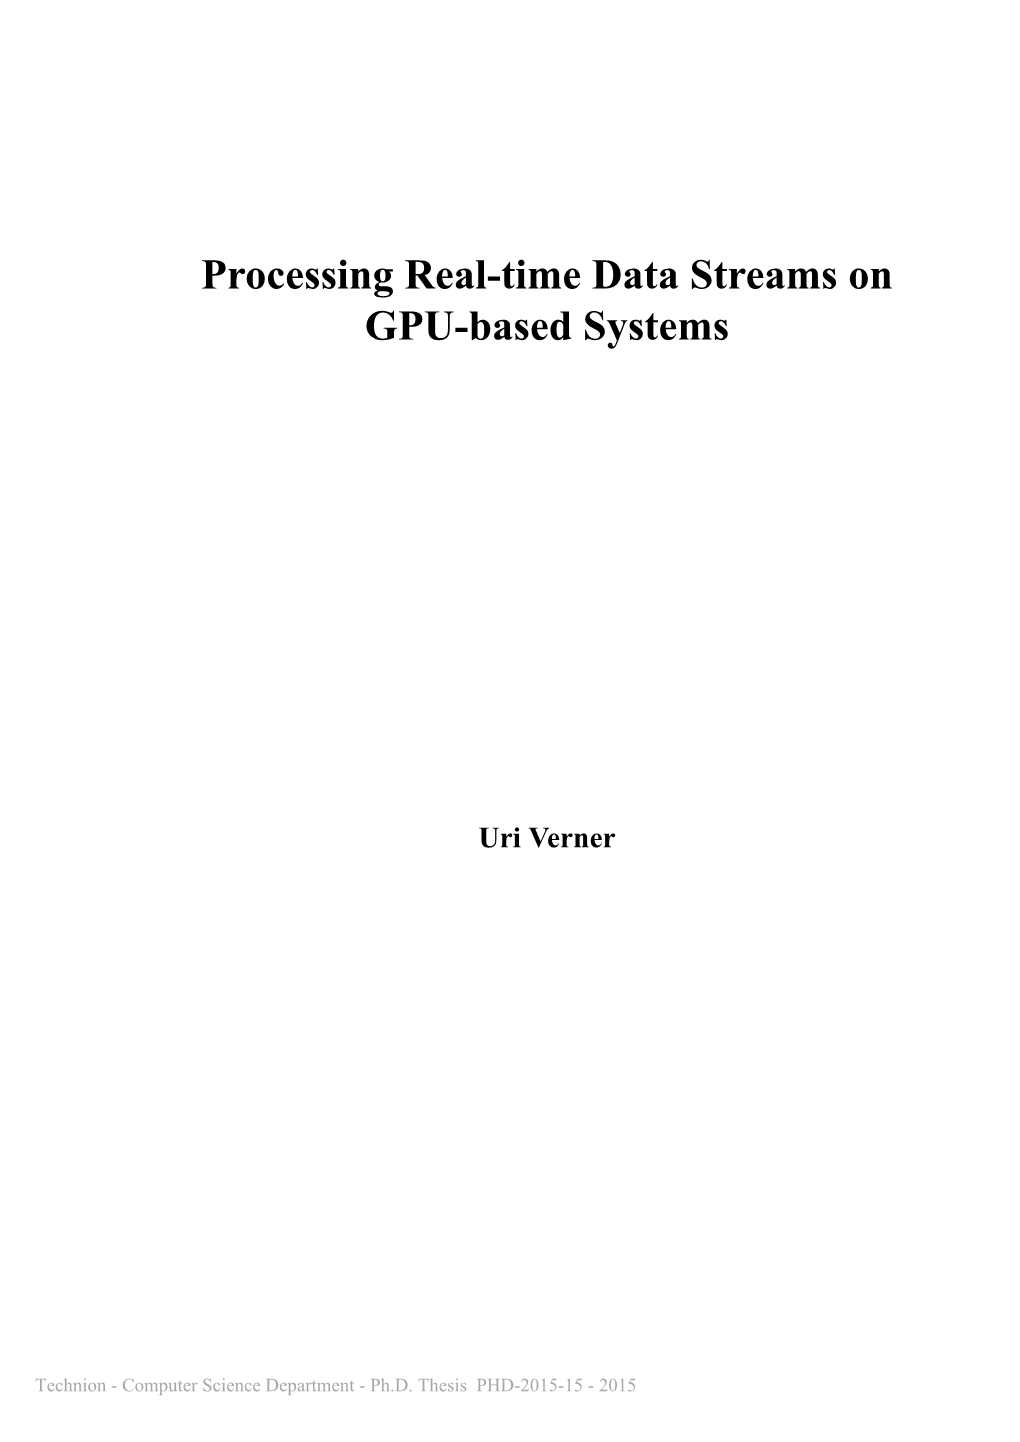 Processing Real-Time Data Streams on GPU-Based Systems